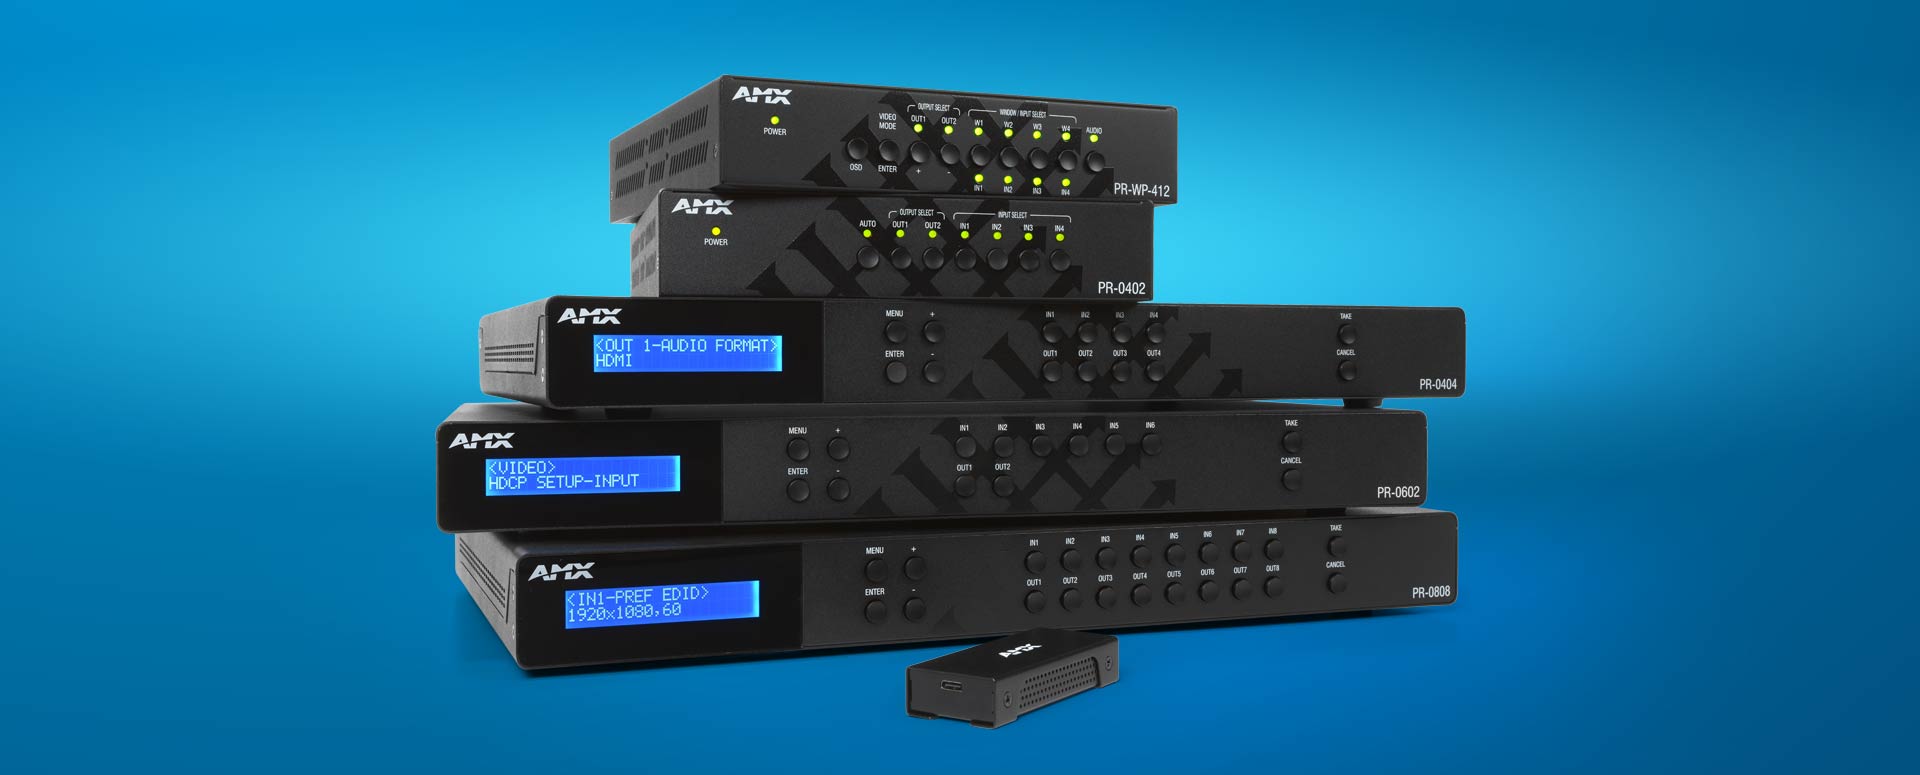 AMX by HARMAN Debuts Powerful, Affordable Family of 4K60 4:4:4 Matrix Switching, Window Processing, and HDMI-TO-USB Capture Products 